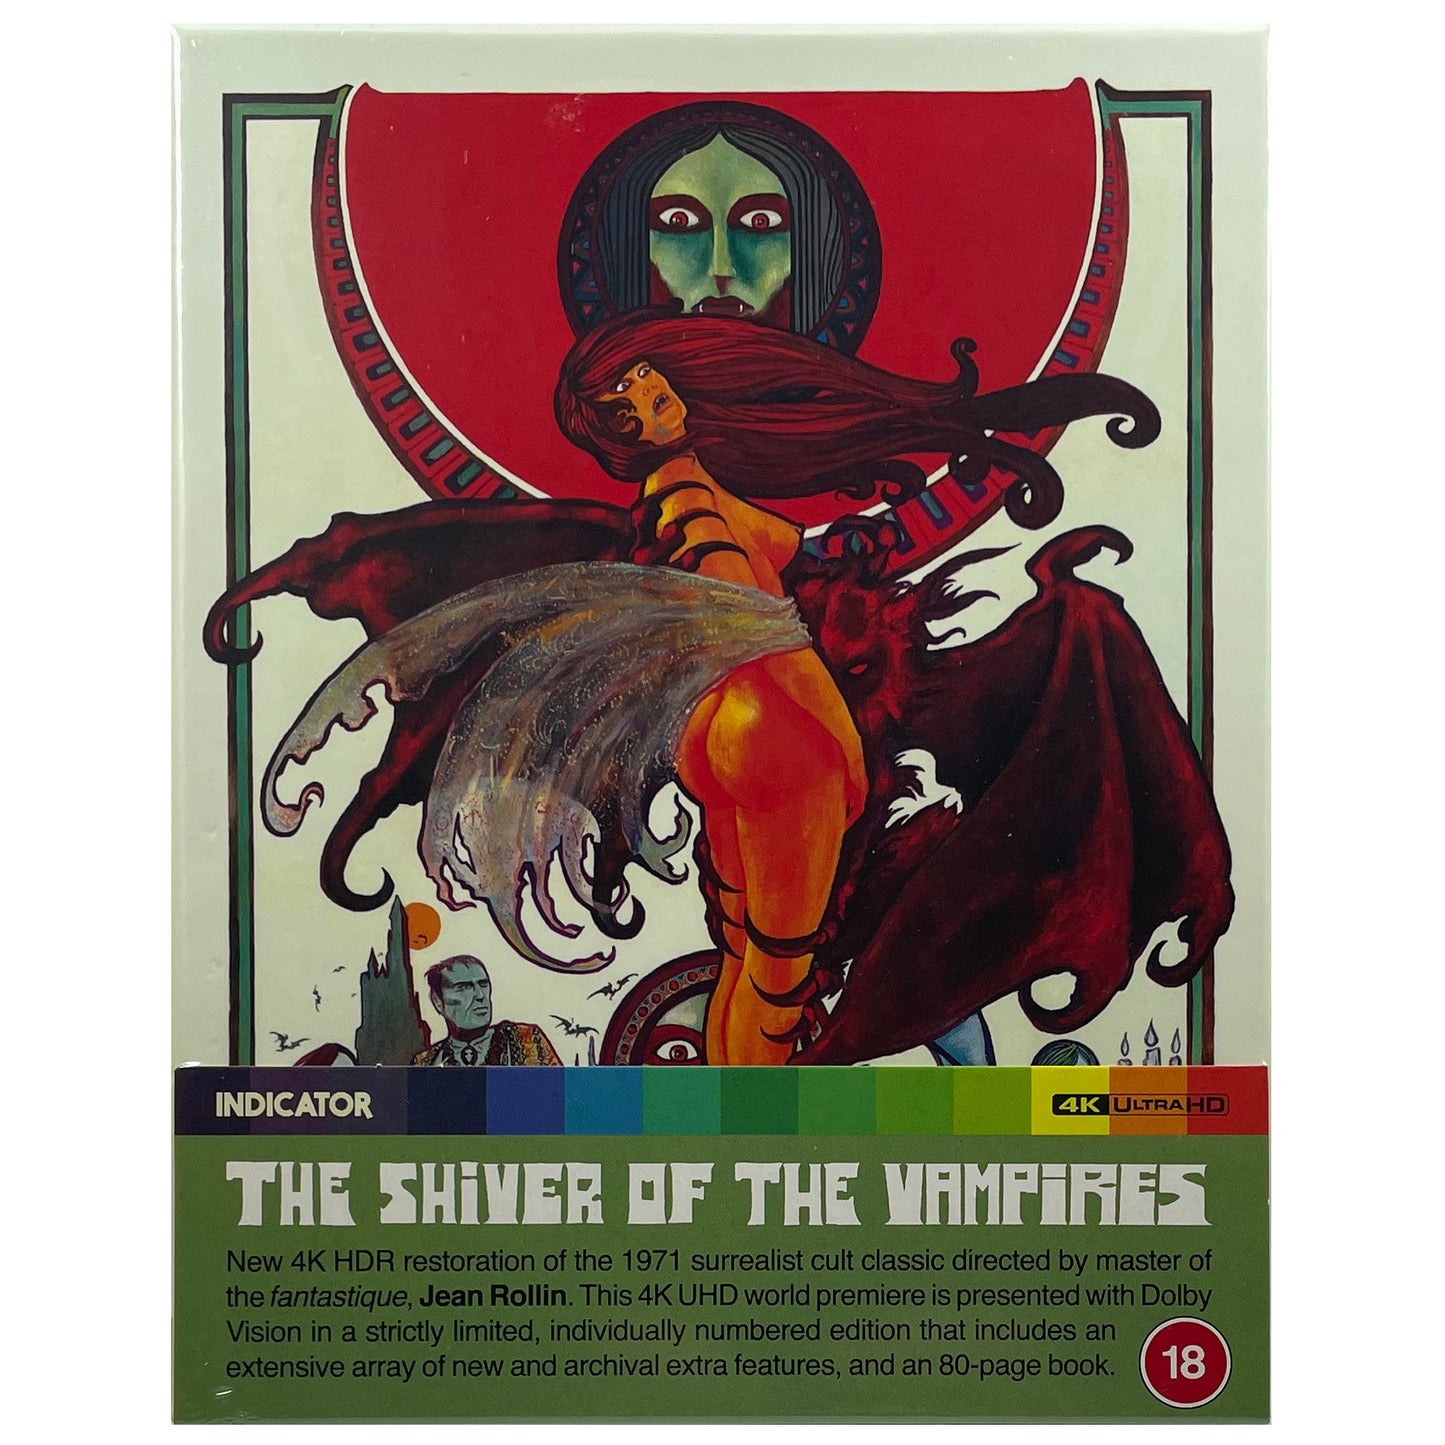 The Shiver of the Vampires 4K Ultra HD Blu-Ray - Limited Edition